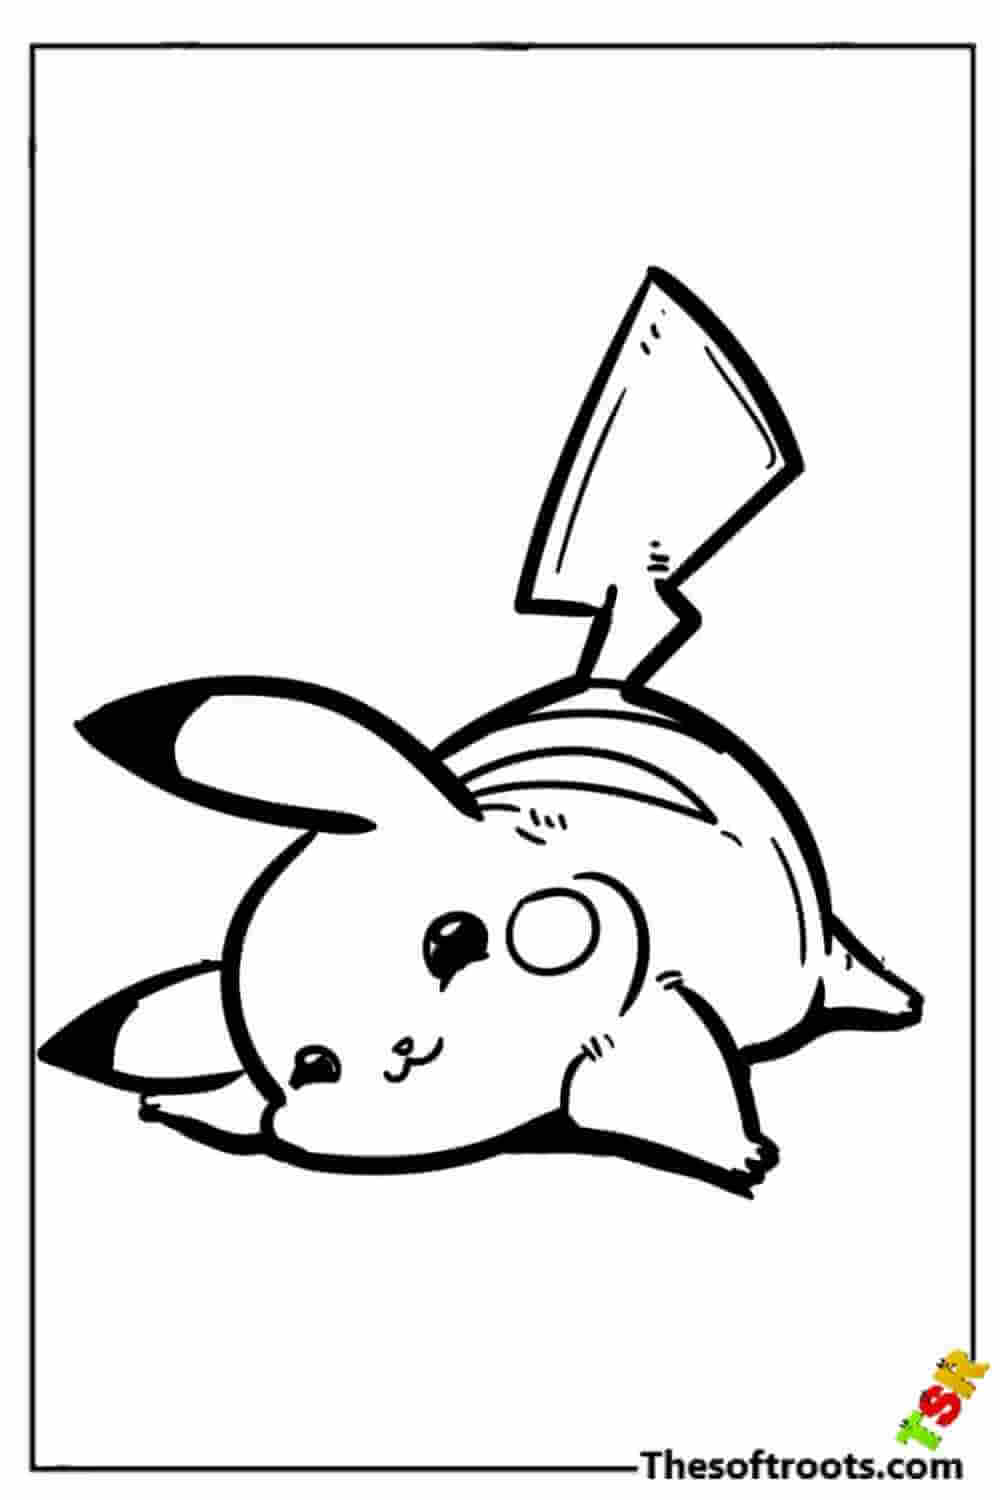 Pikachu is chilling coloring pages